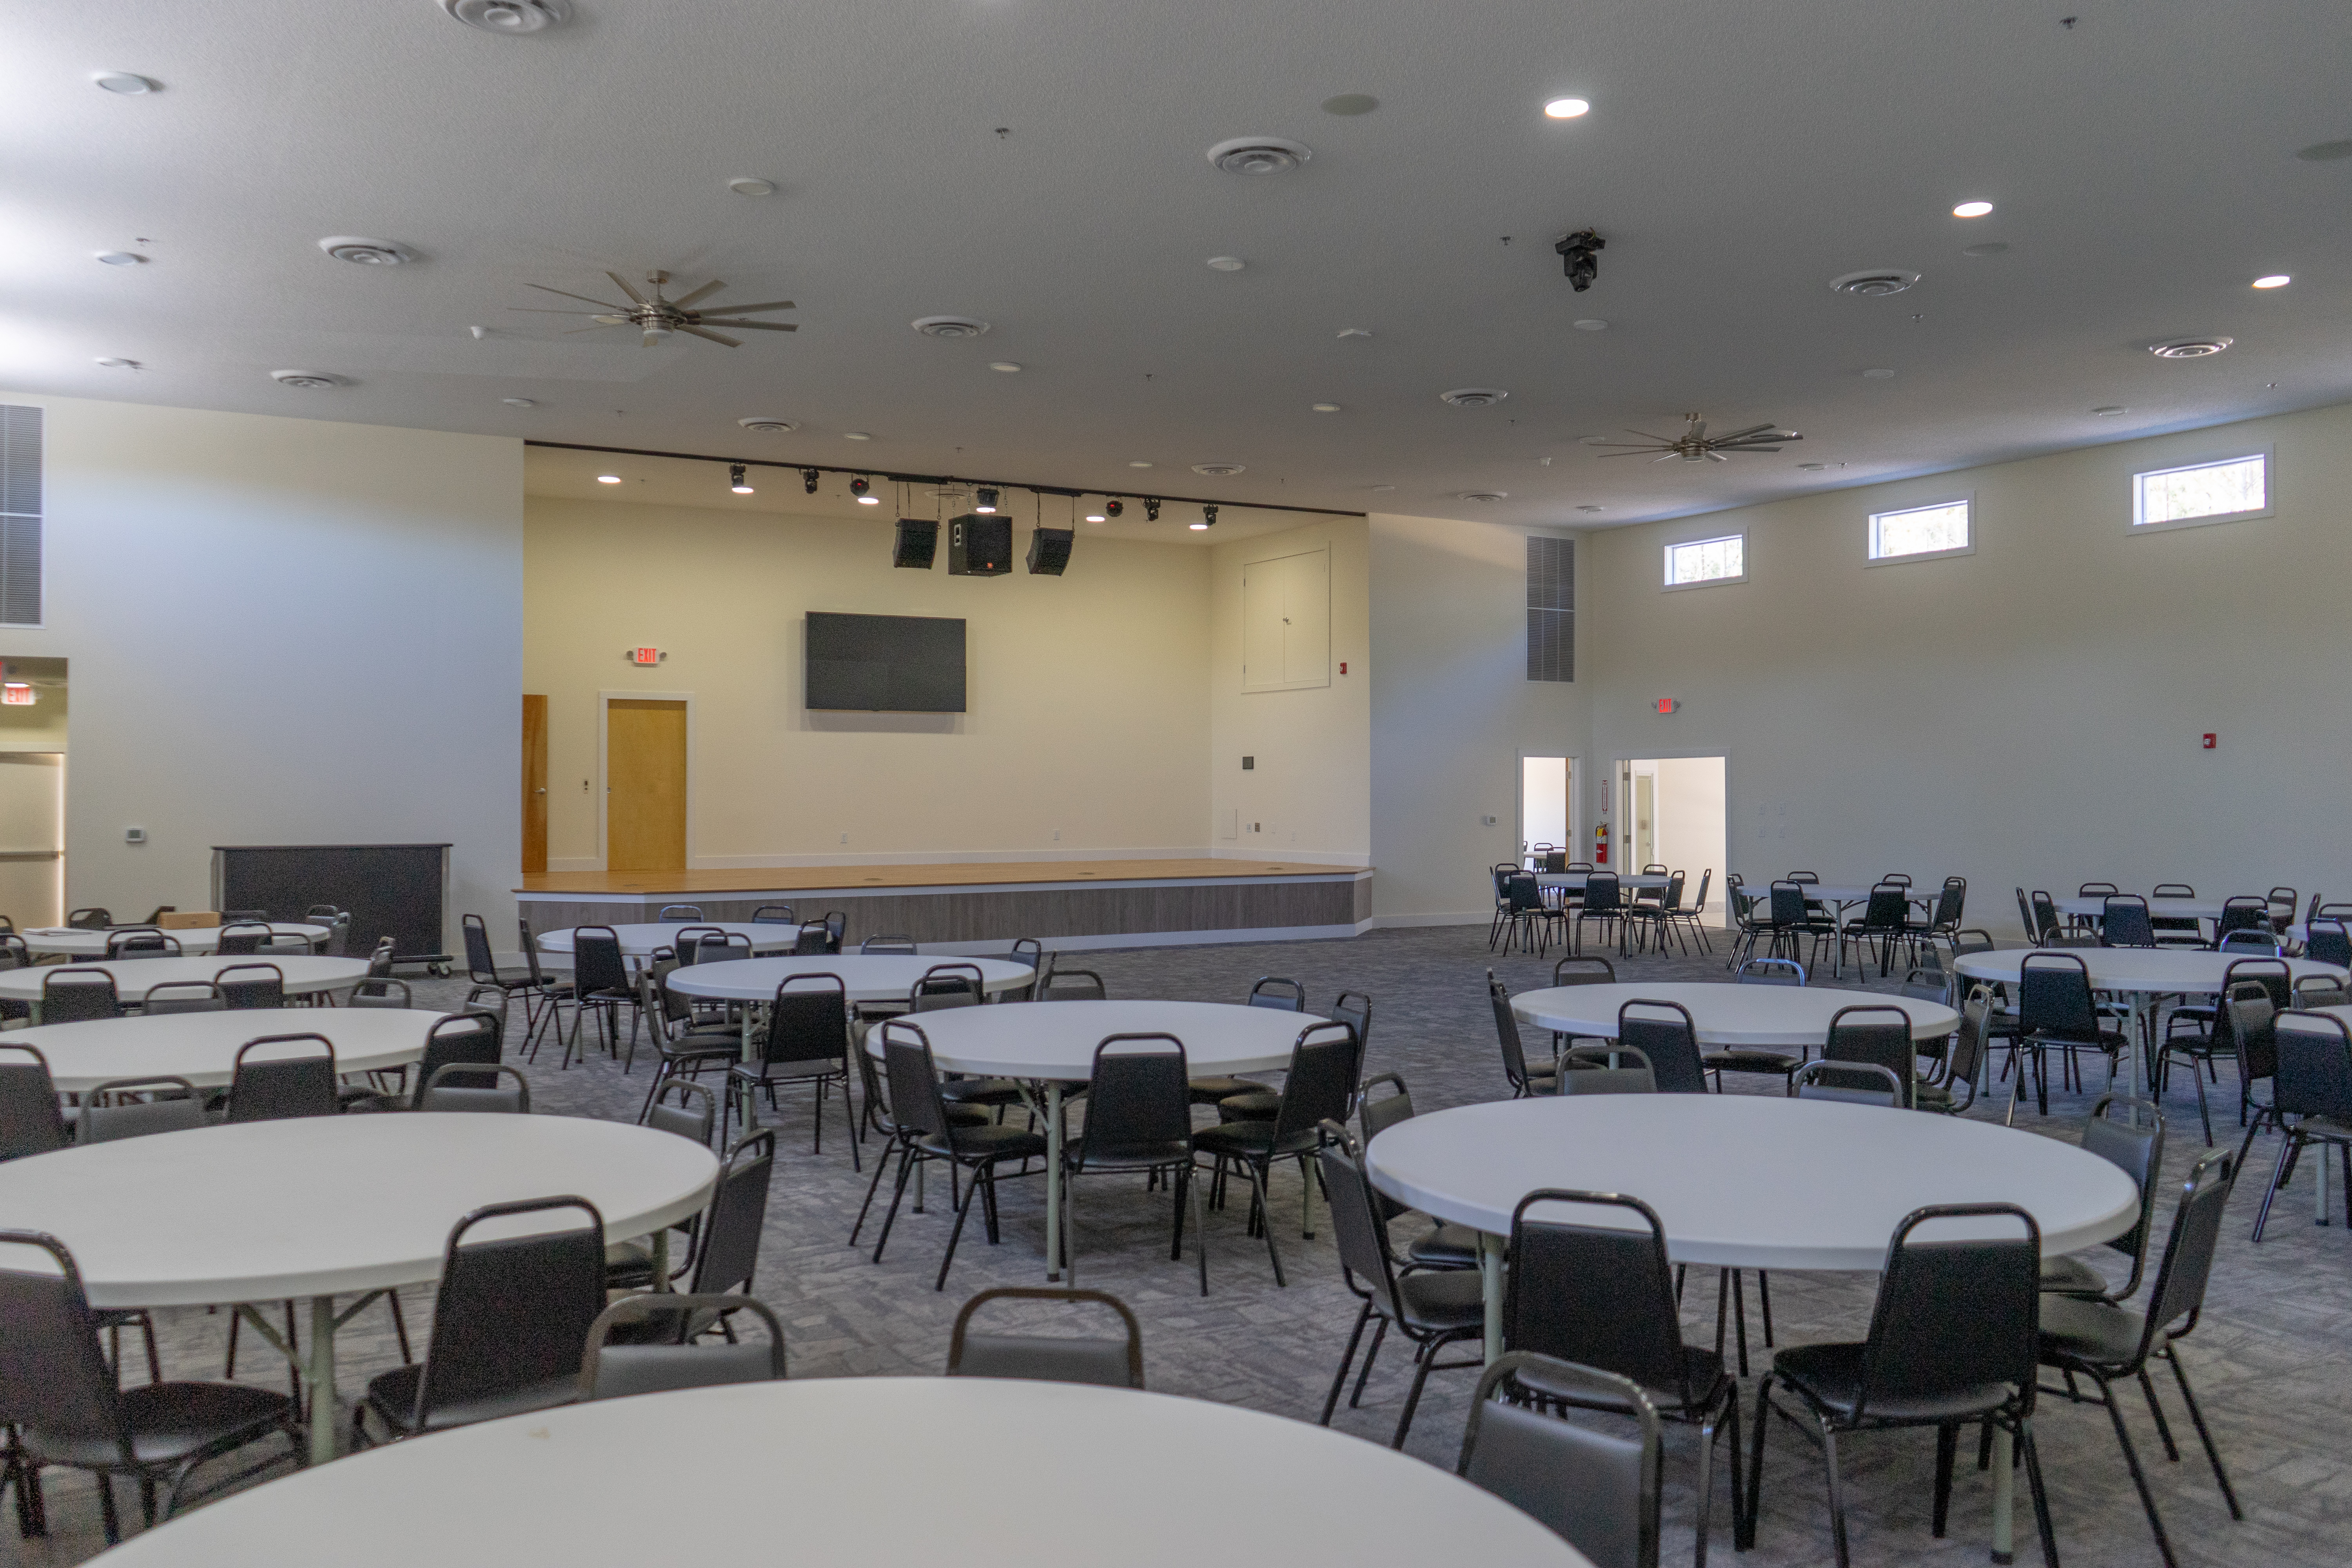 Plenty of room for seating in our main ballroom!